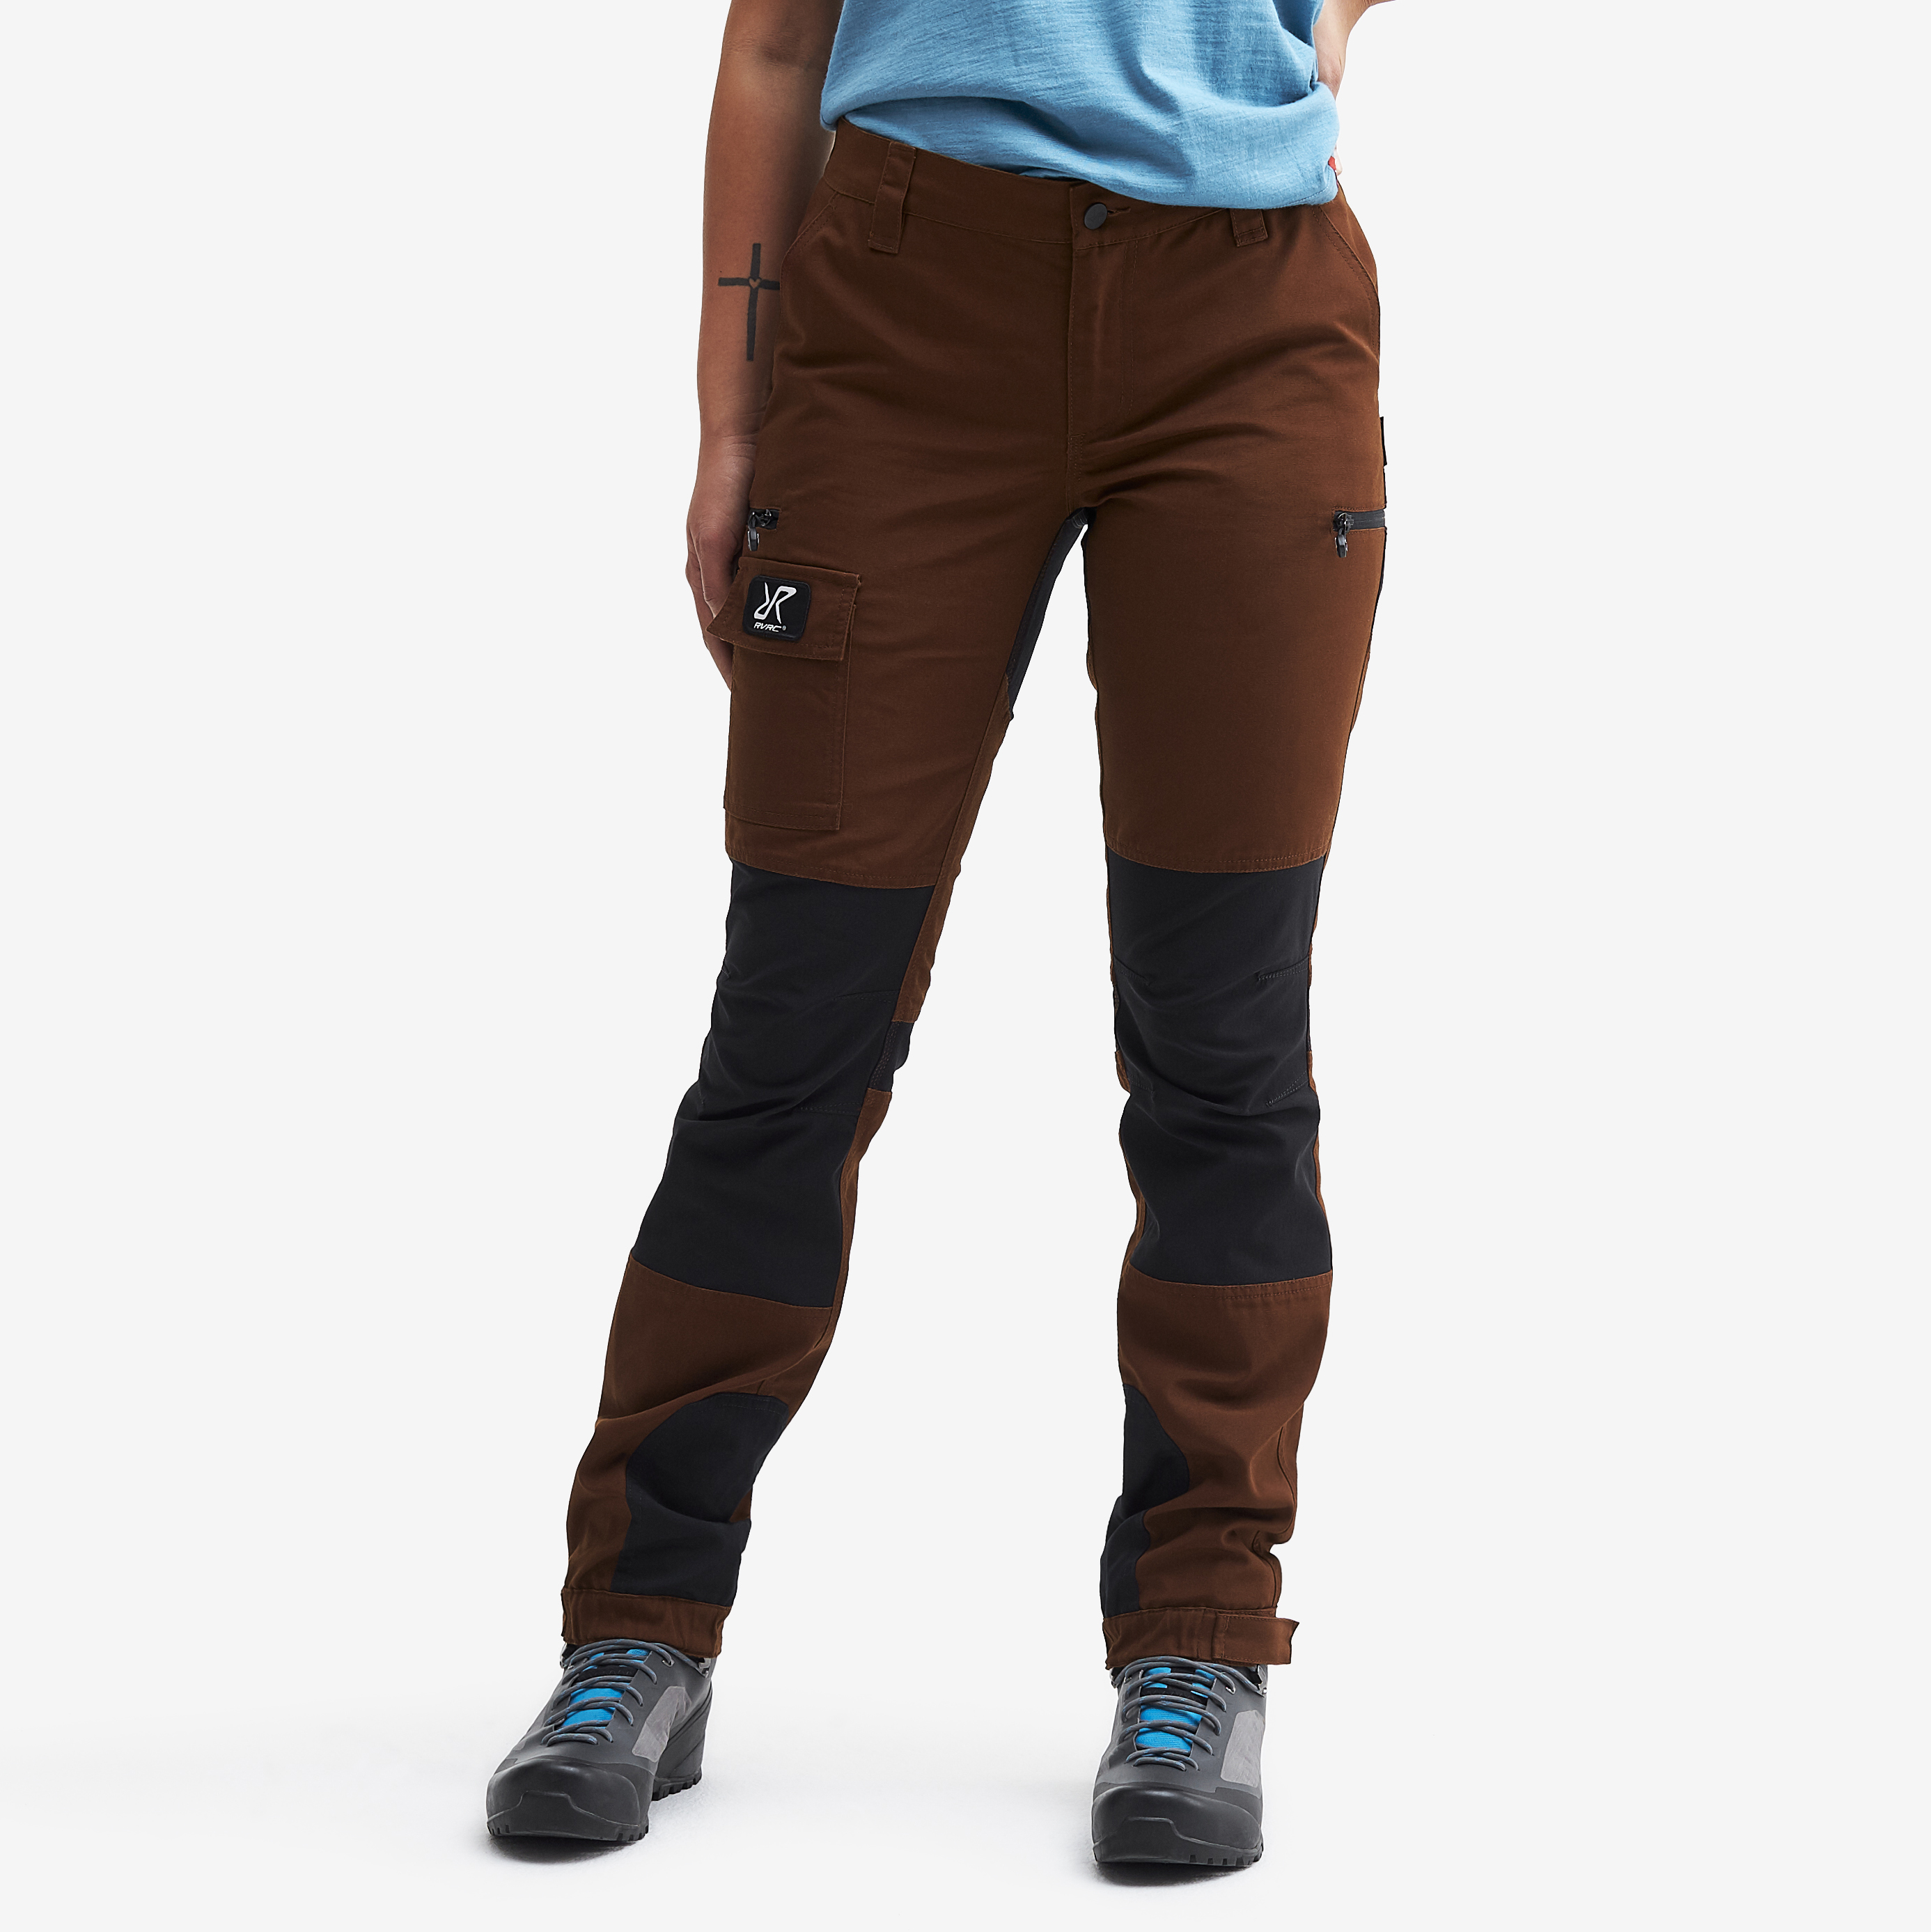 Nordwand outdoor pants for women in brown